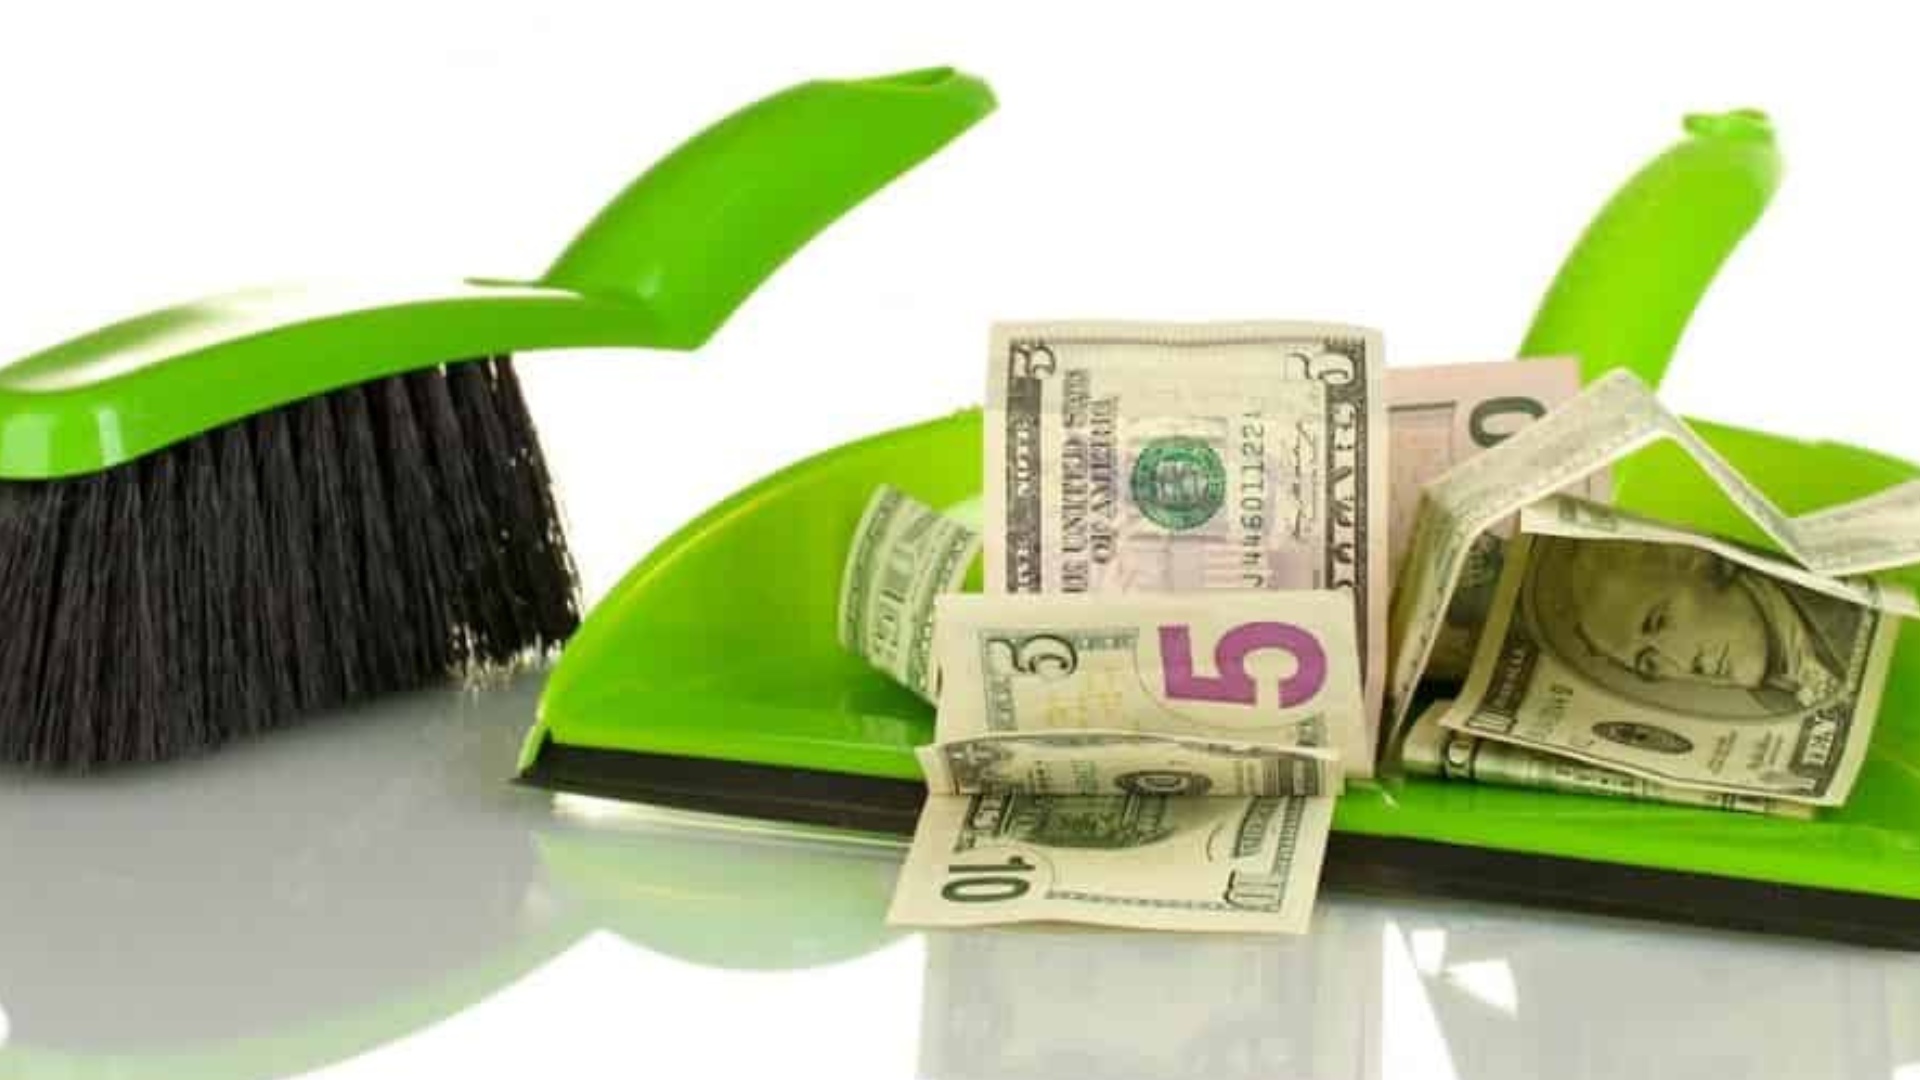 End-of-Lease-Cleaning-Cost-Guide